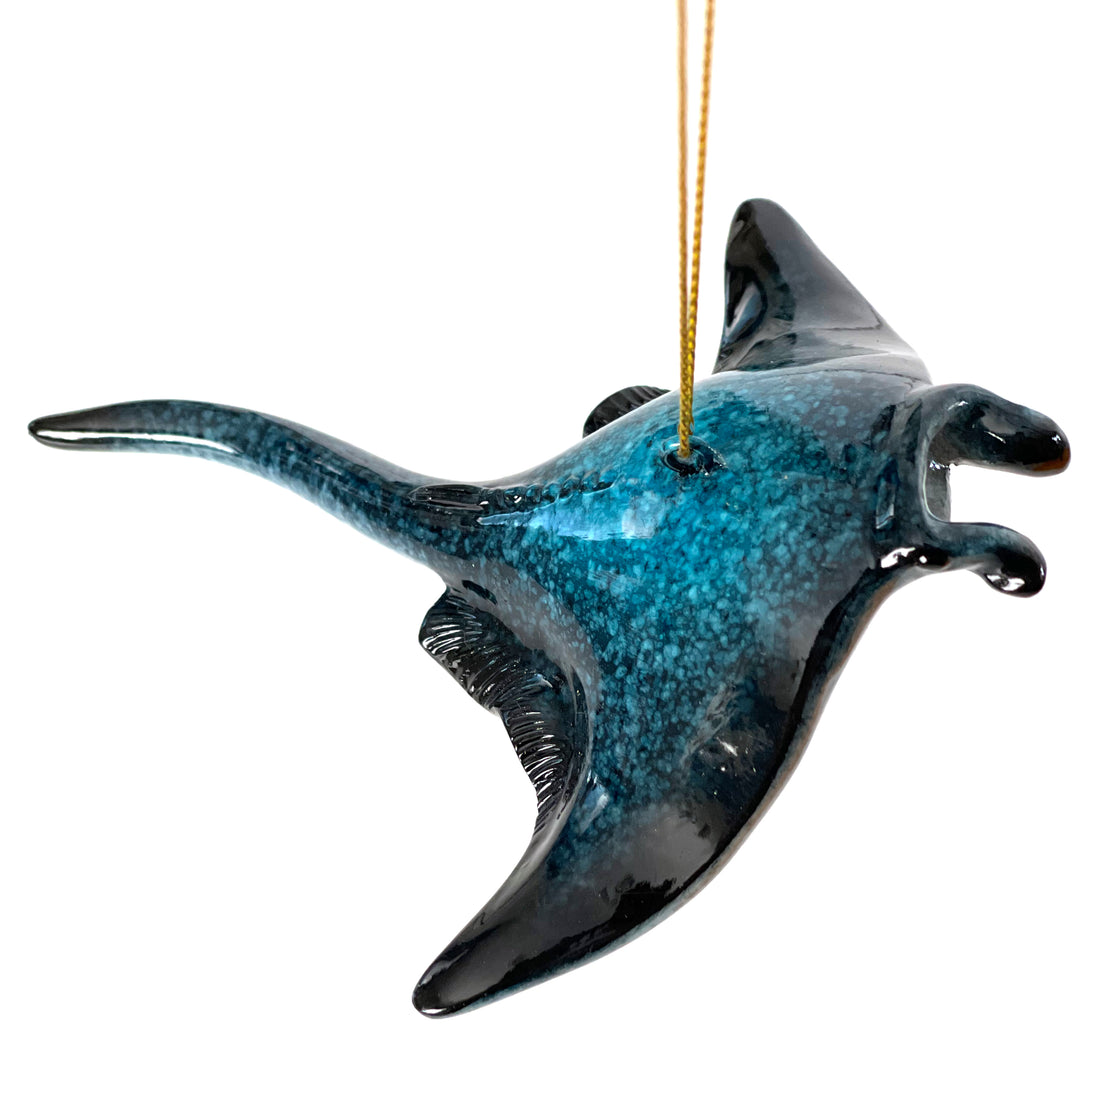  A hand-painted ceramic Christmas ornament in a soothing blueish hue showcasing a beautifully crafted manta ray design set against a clean white background by rengora